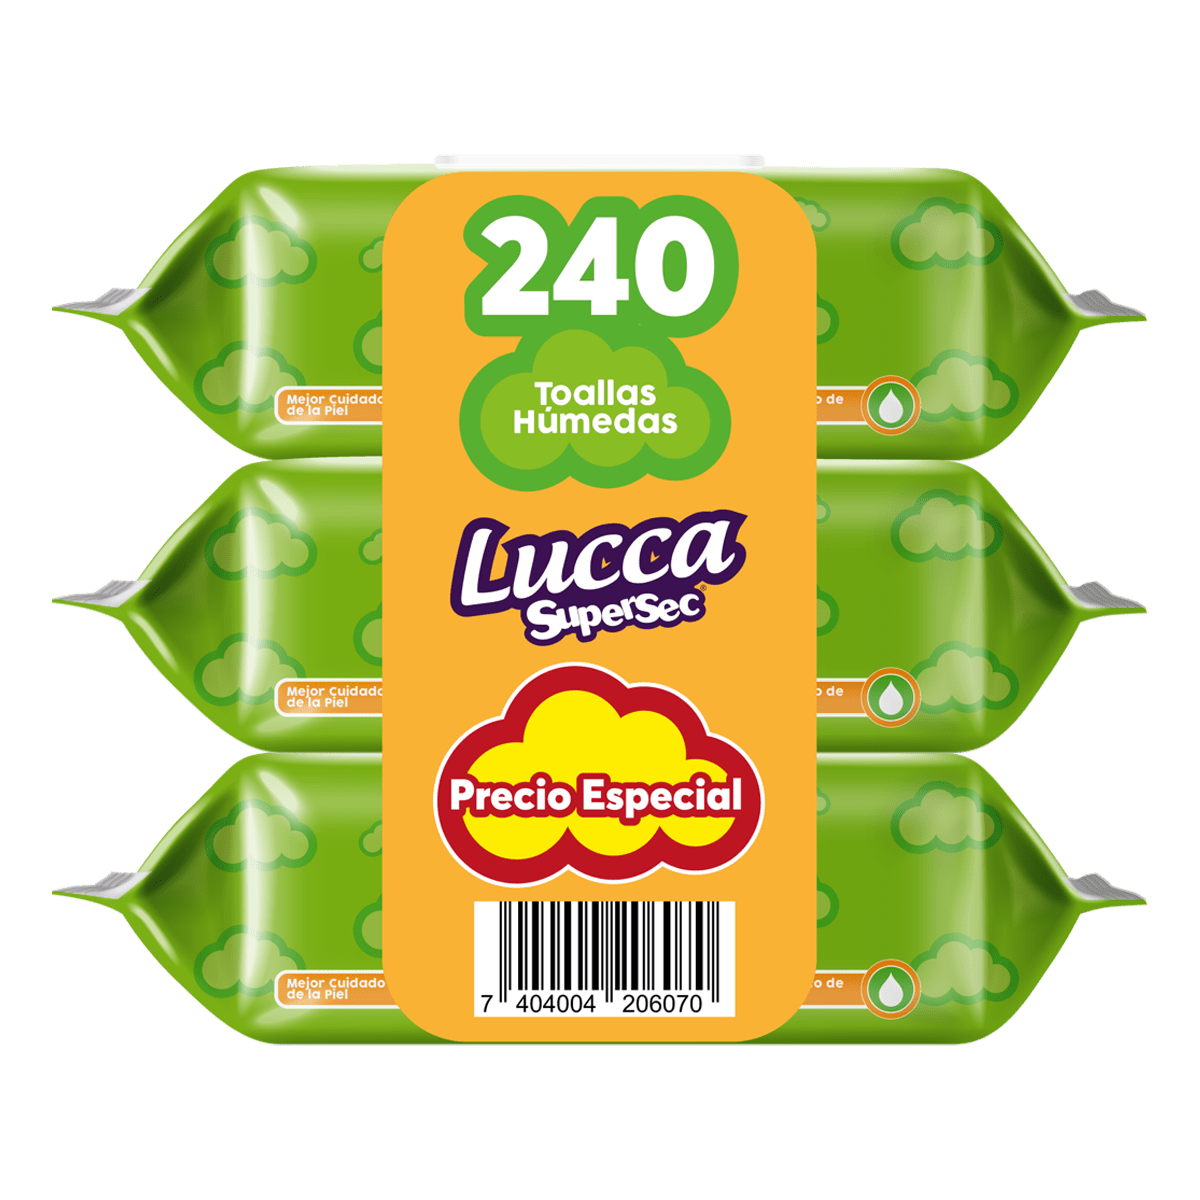 3pack Lucca SuperSec<br>4 paquetes x 240 toallas